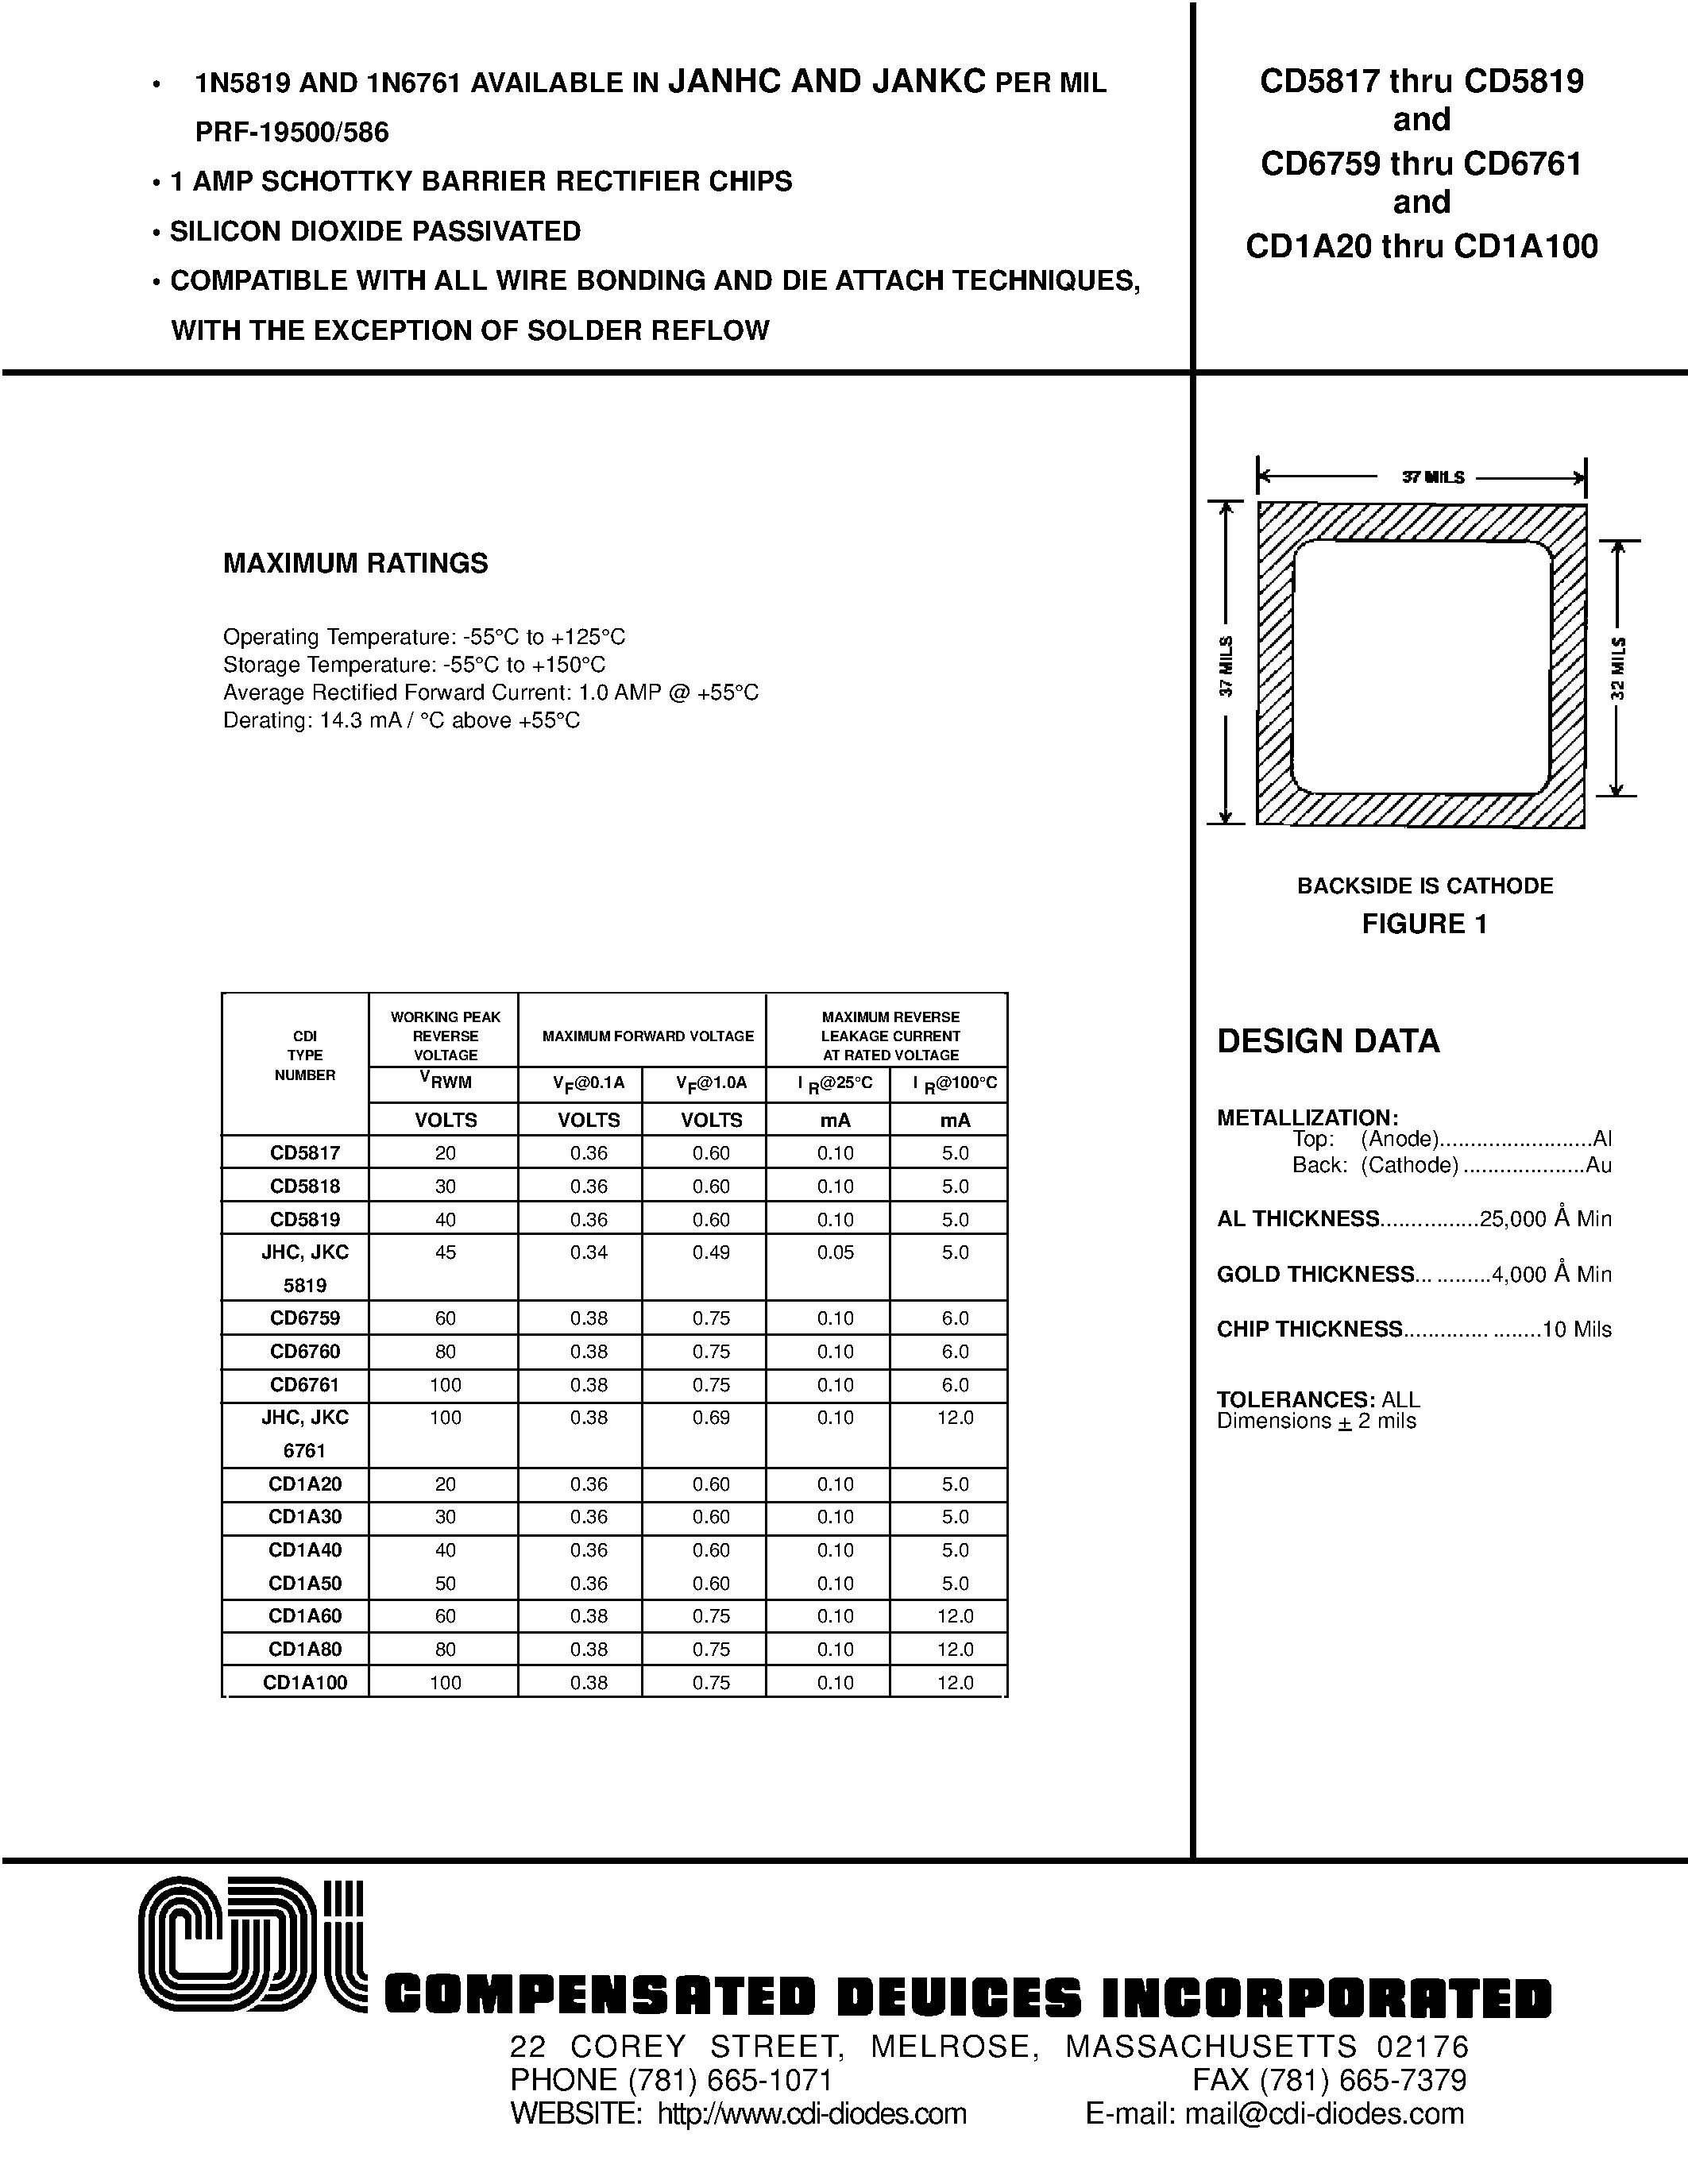 Datasheet CD1A80 - 1 AMP SCHOTTKY BARRIER RECTIFIER CHIPS page 1